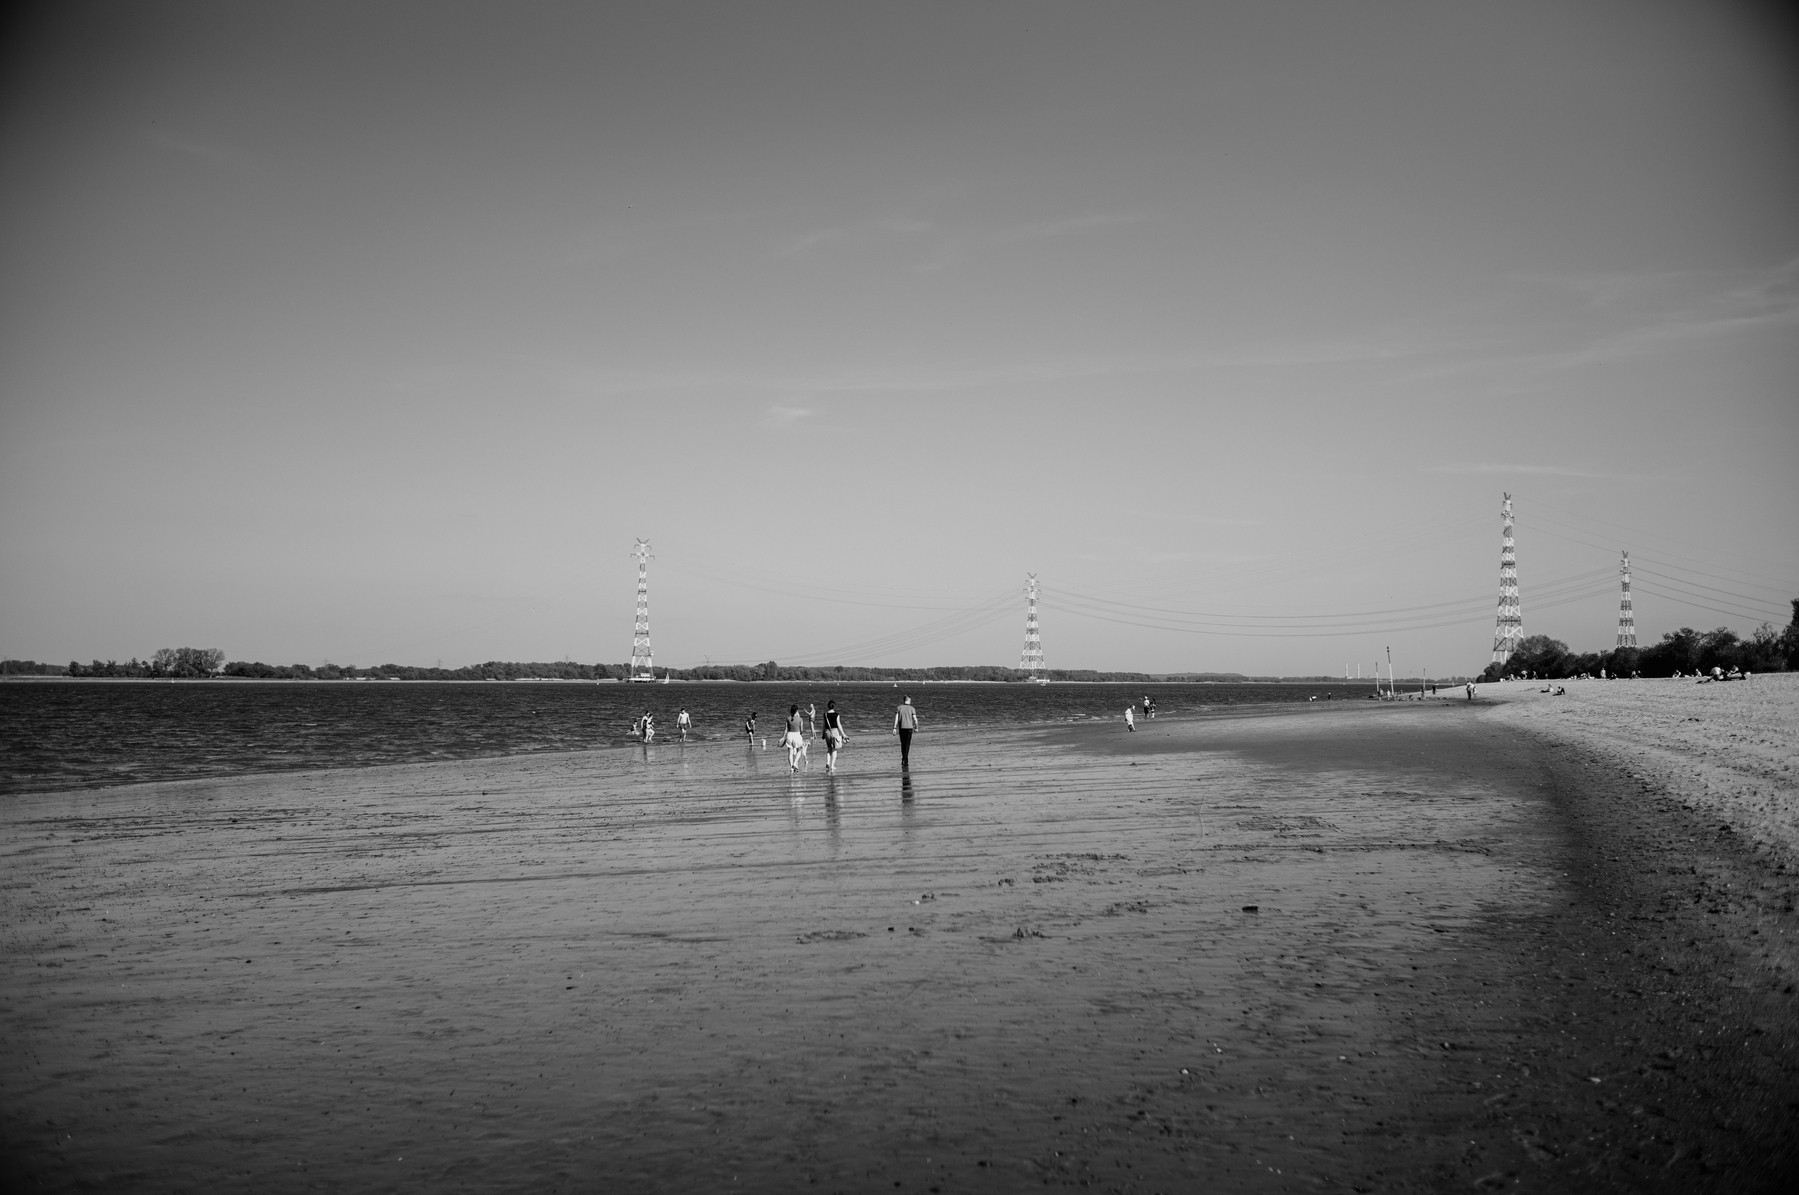 The image depicts people scattered along a wide, flat shore with shallow water, featuring large electricity pylons in the background under a clear sky, rendered in black and white.